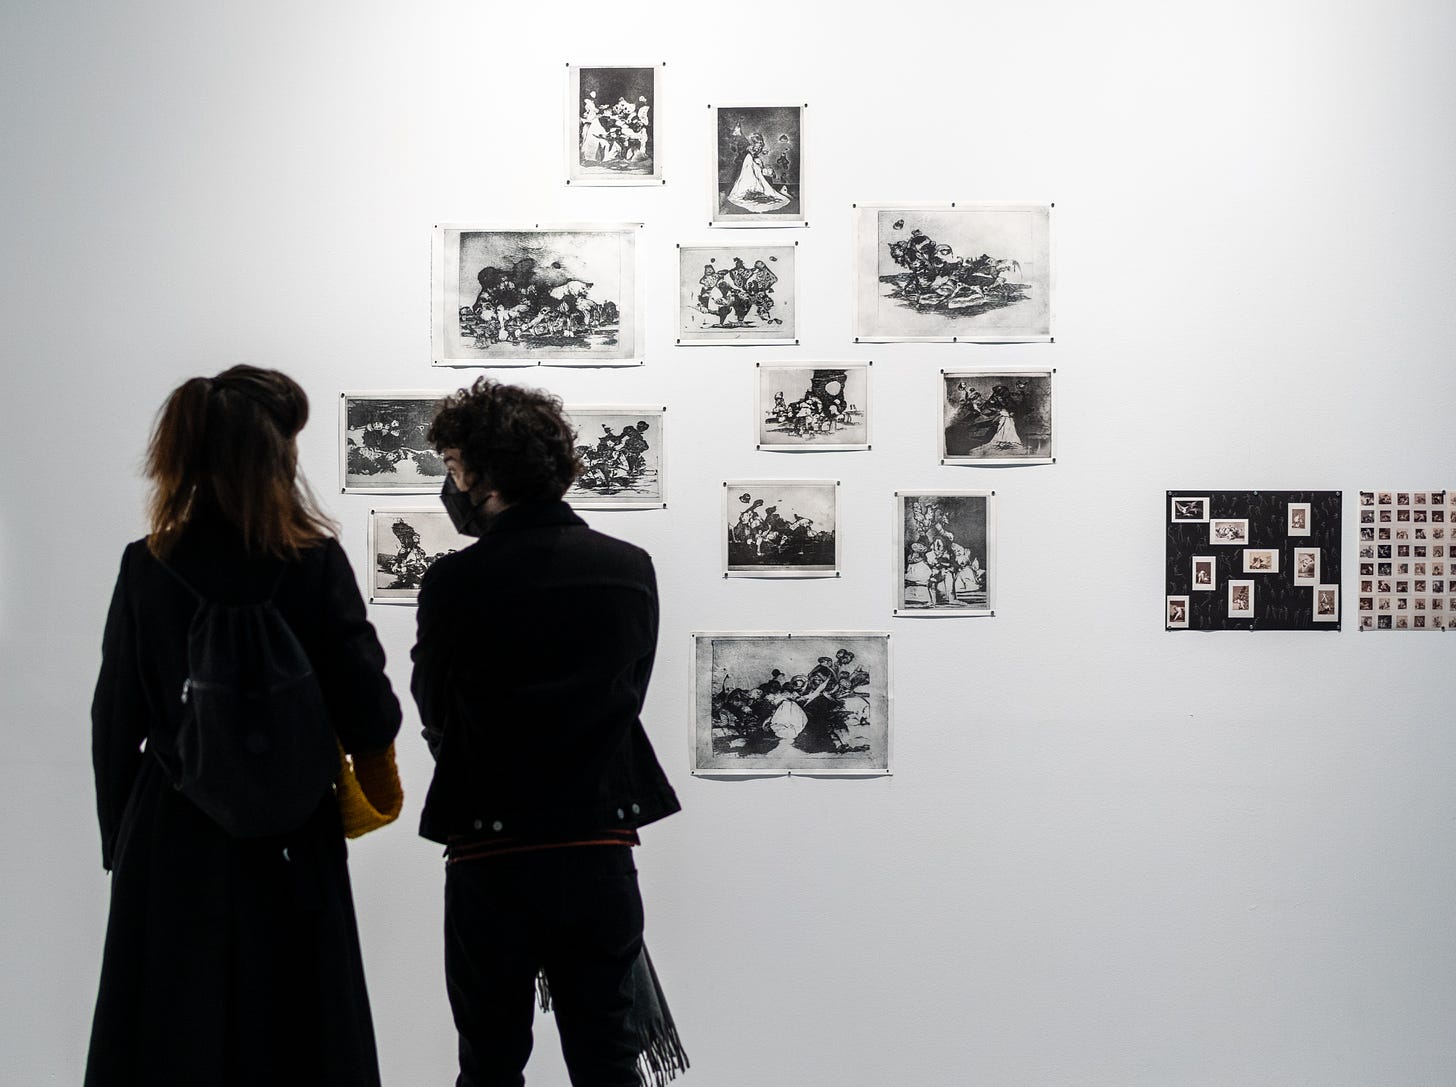 Gallery view of intaglio prints on the wall. Two people stand and chat in front of the prints, masks on.